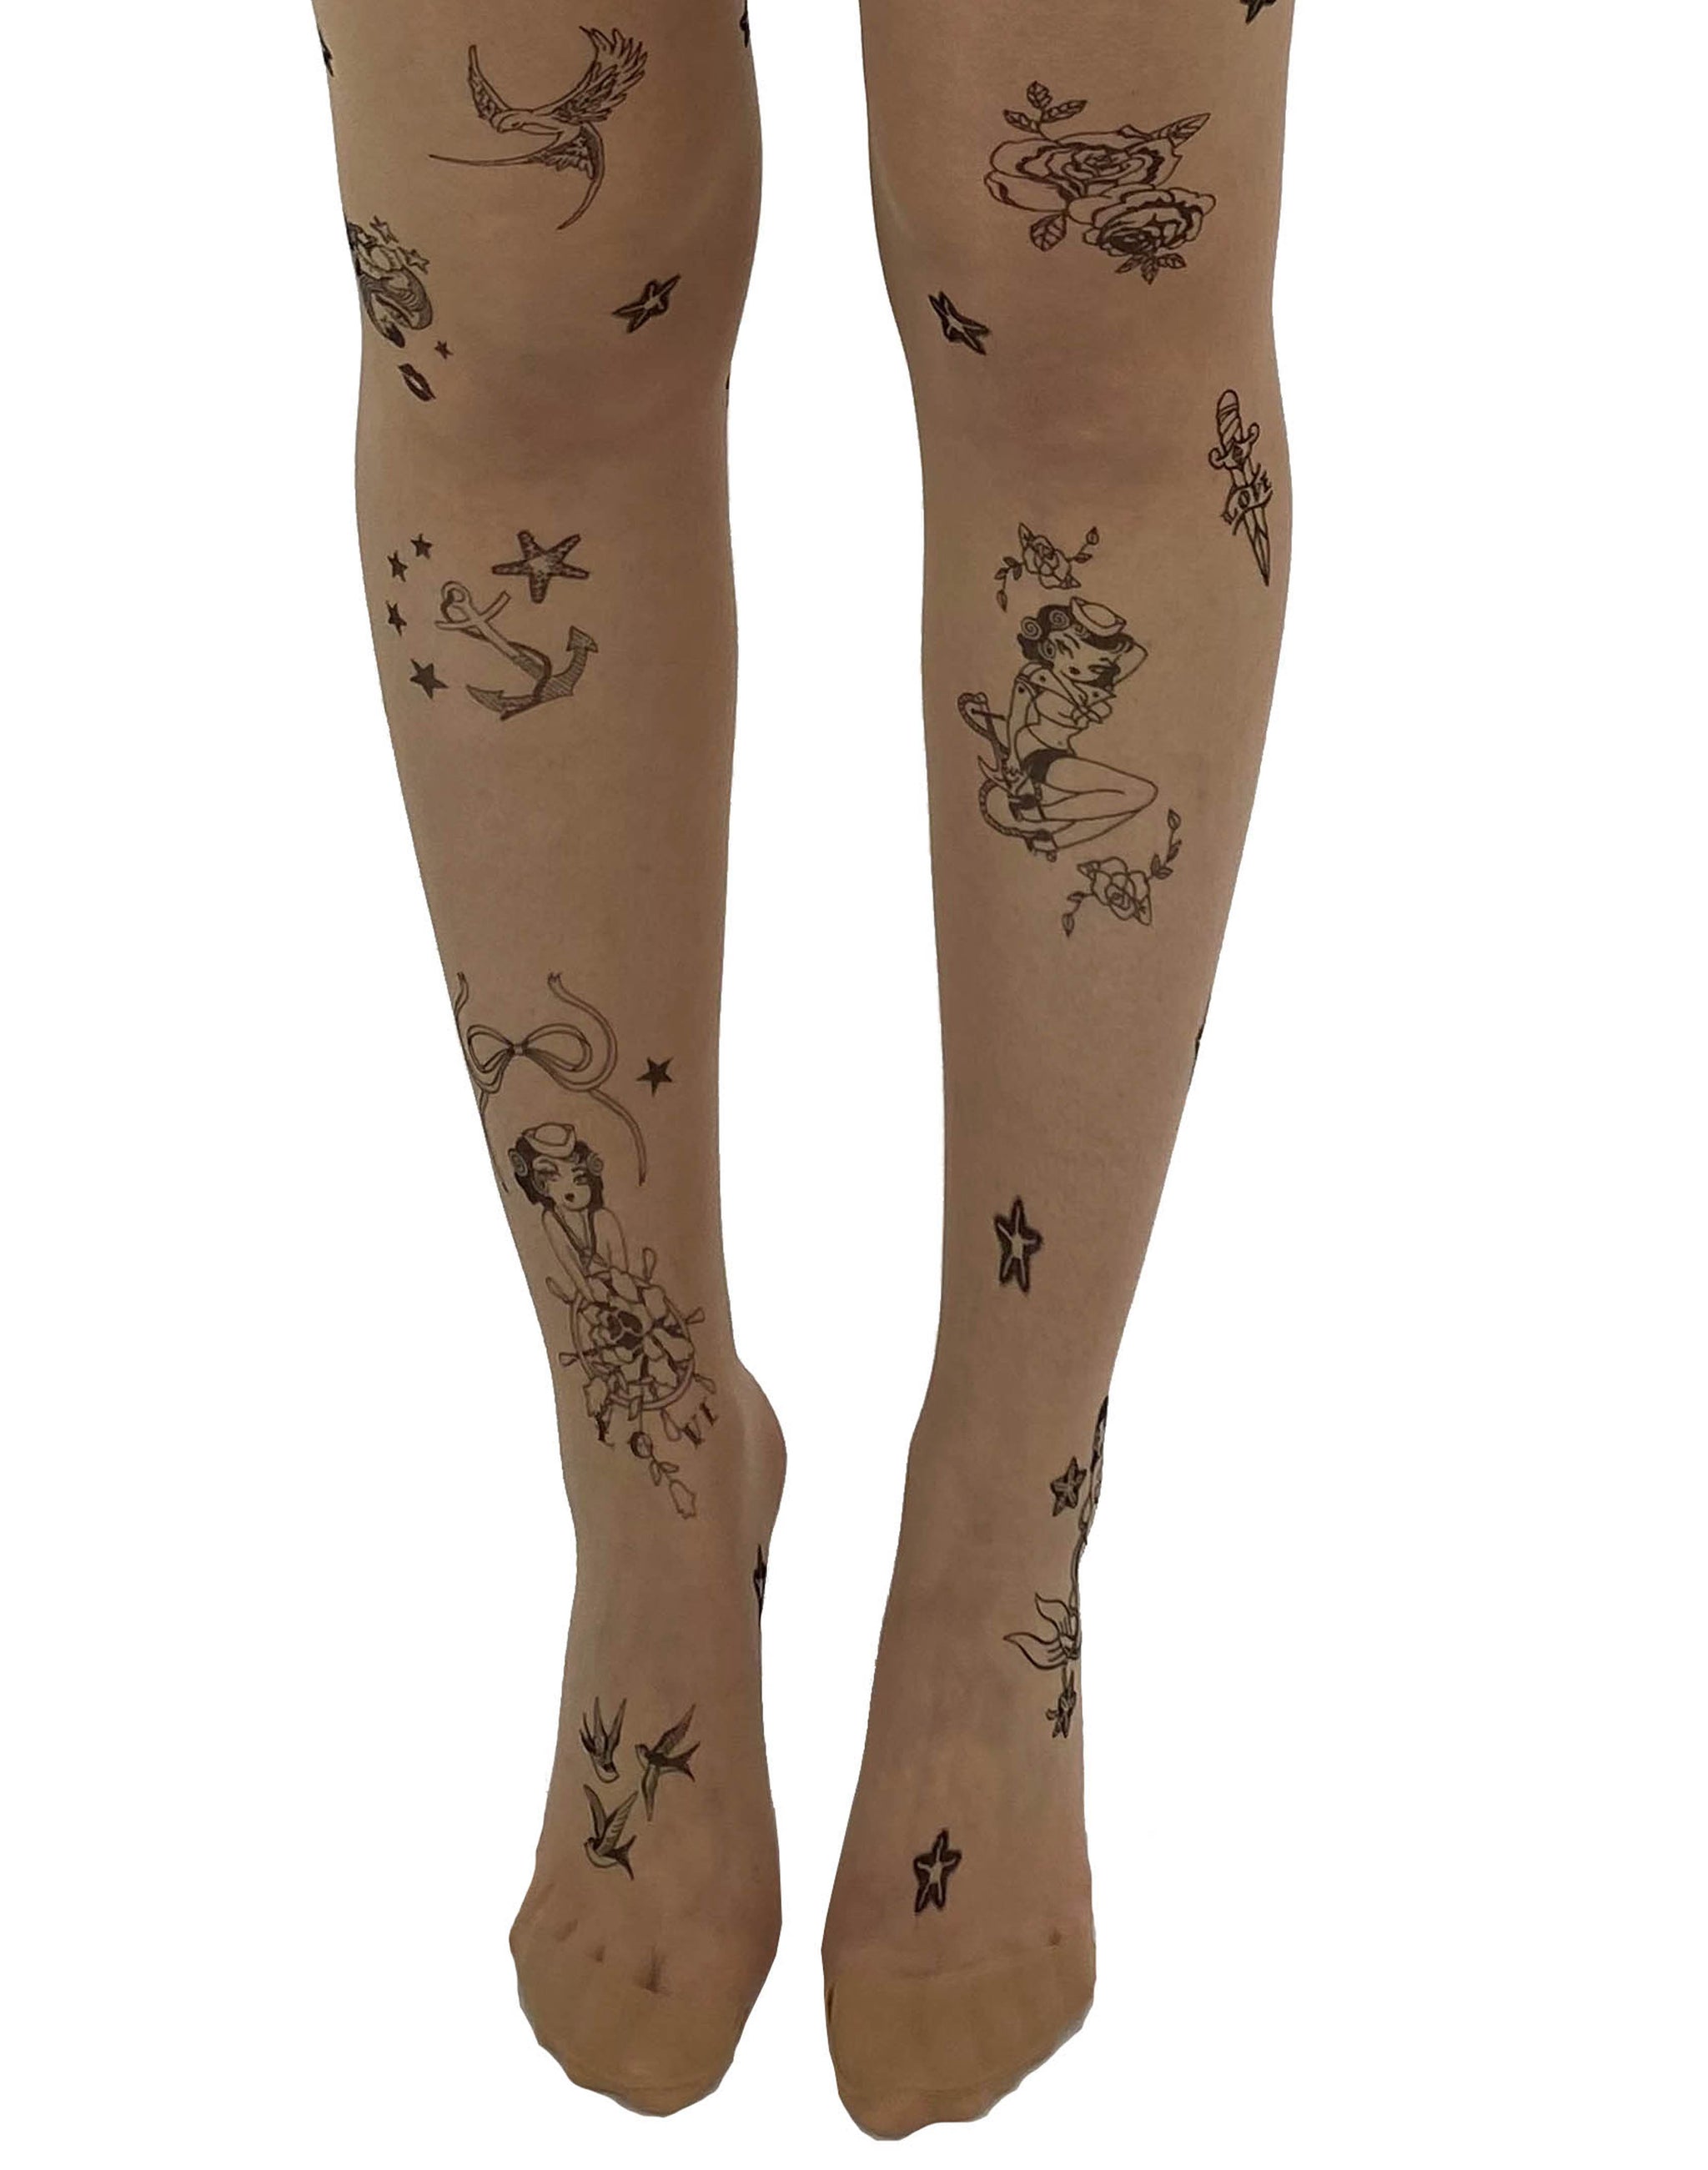 A Girl With Flowers Tattoo - Pantyhose